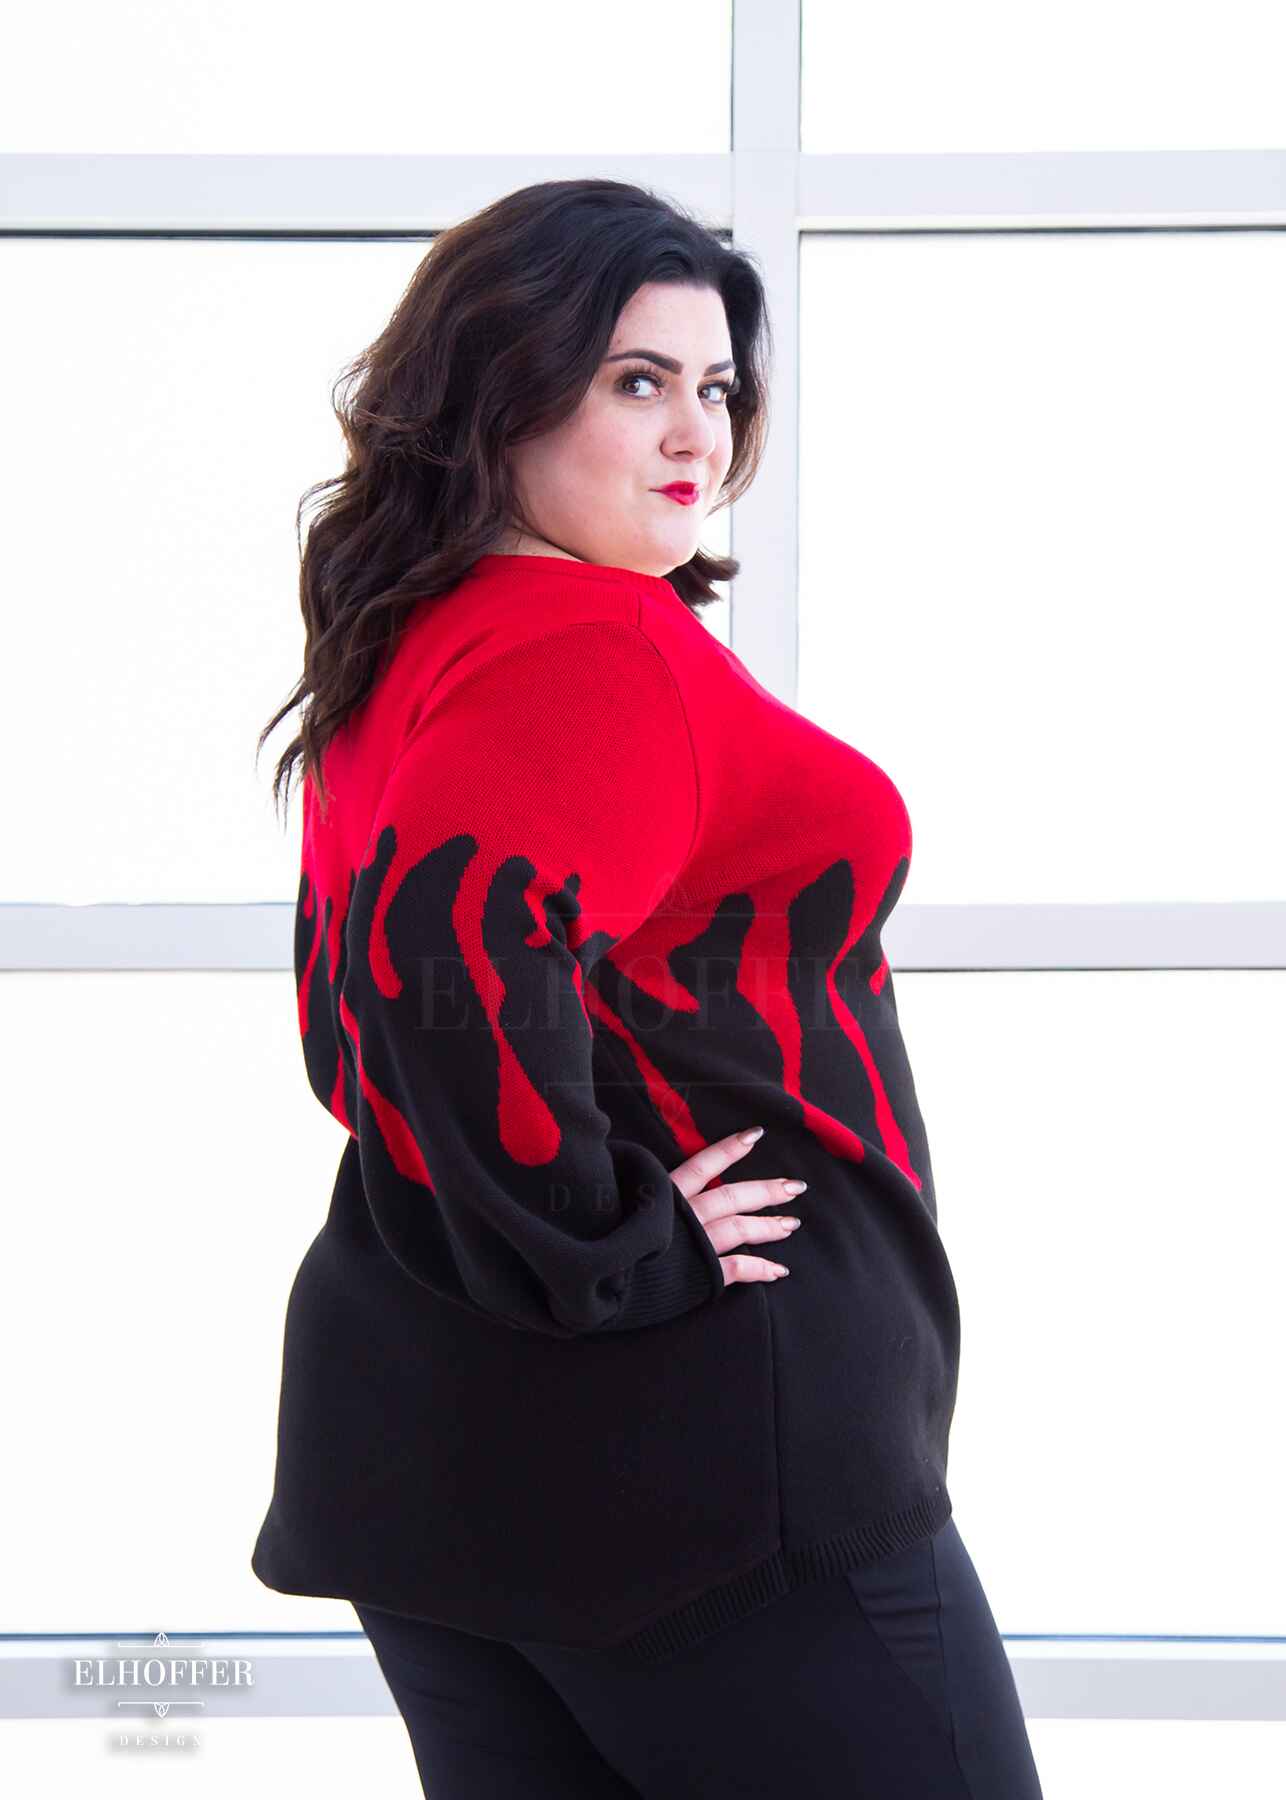 Stacy, a fair skinned XL model with shoulder length wavy dark brown hair, is wearing an oversize sweater with a bright red blood drip design that looks like it's oozing down onto a black sweater that has long billowing sleeves with thumbholes.